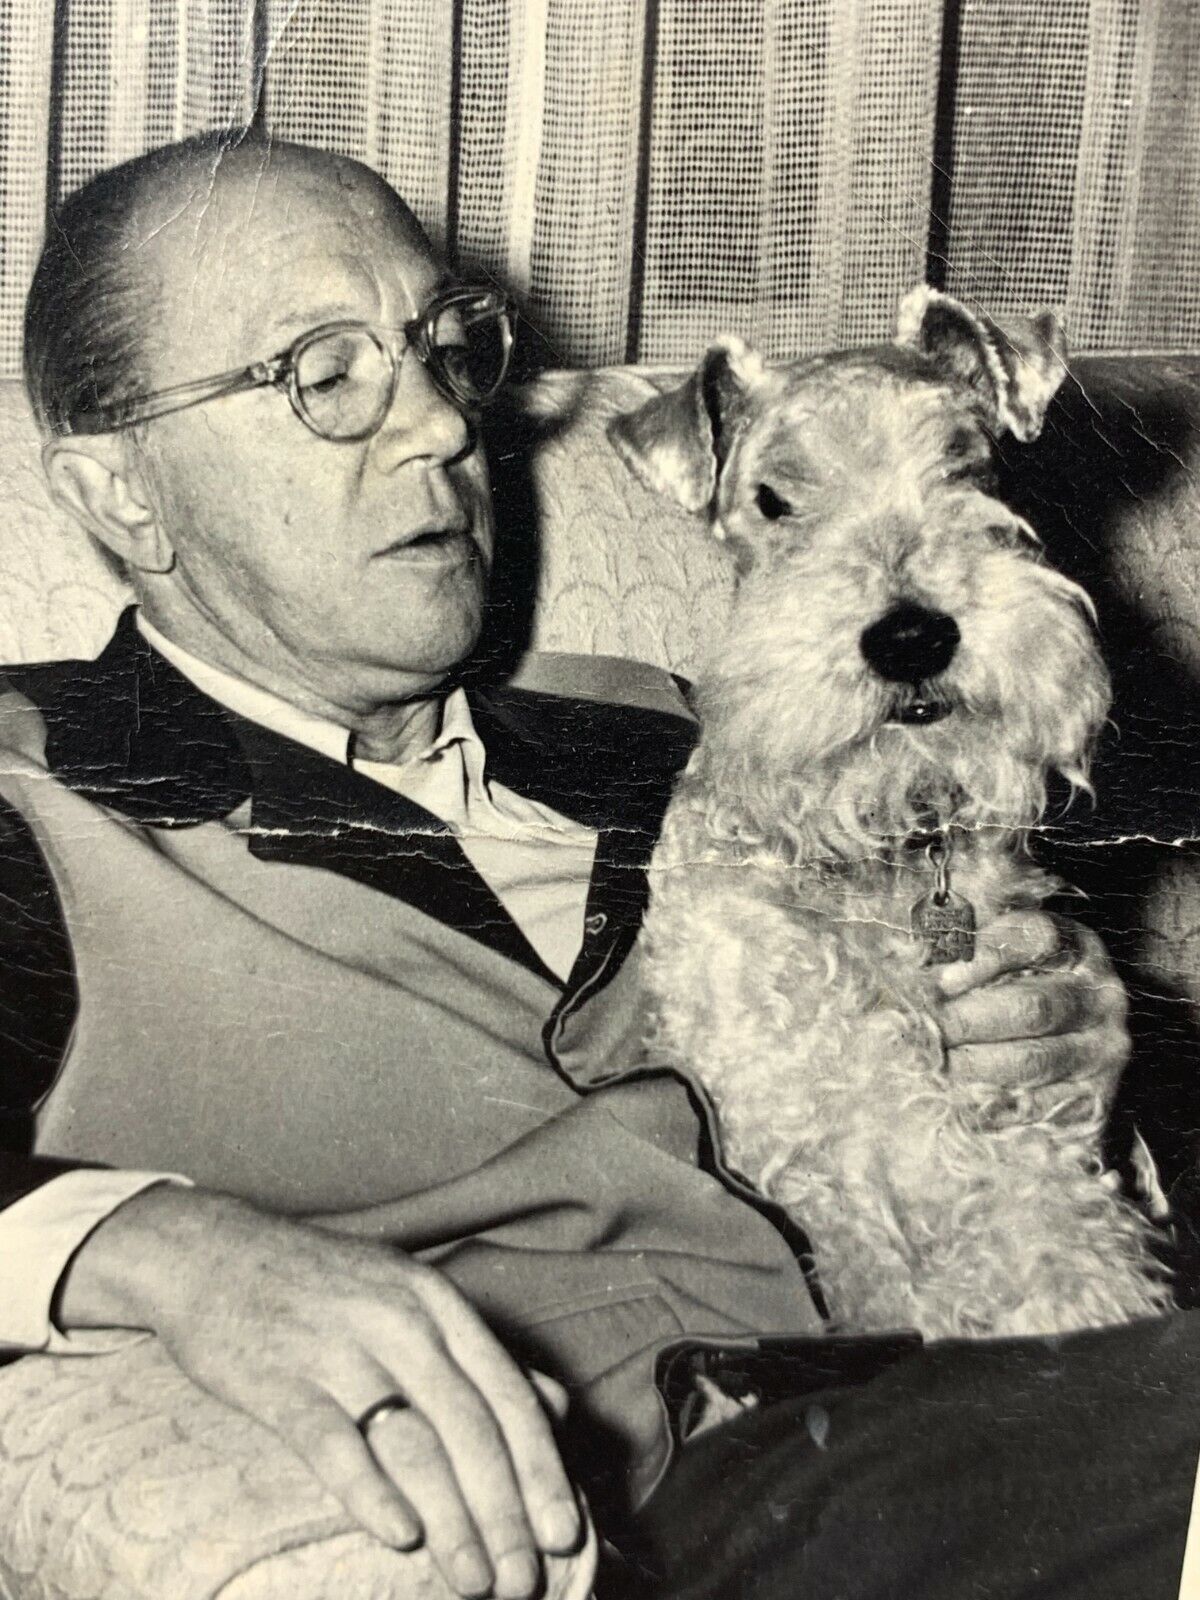 AgD) Found Photo Photograph Man Holding Handsome Schnauzer Dog *Creased*